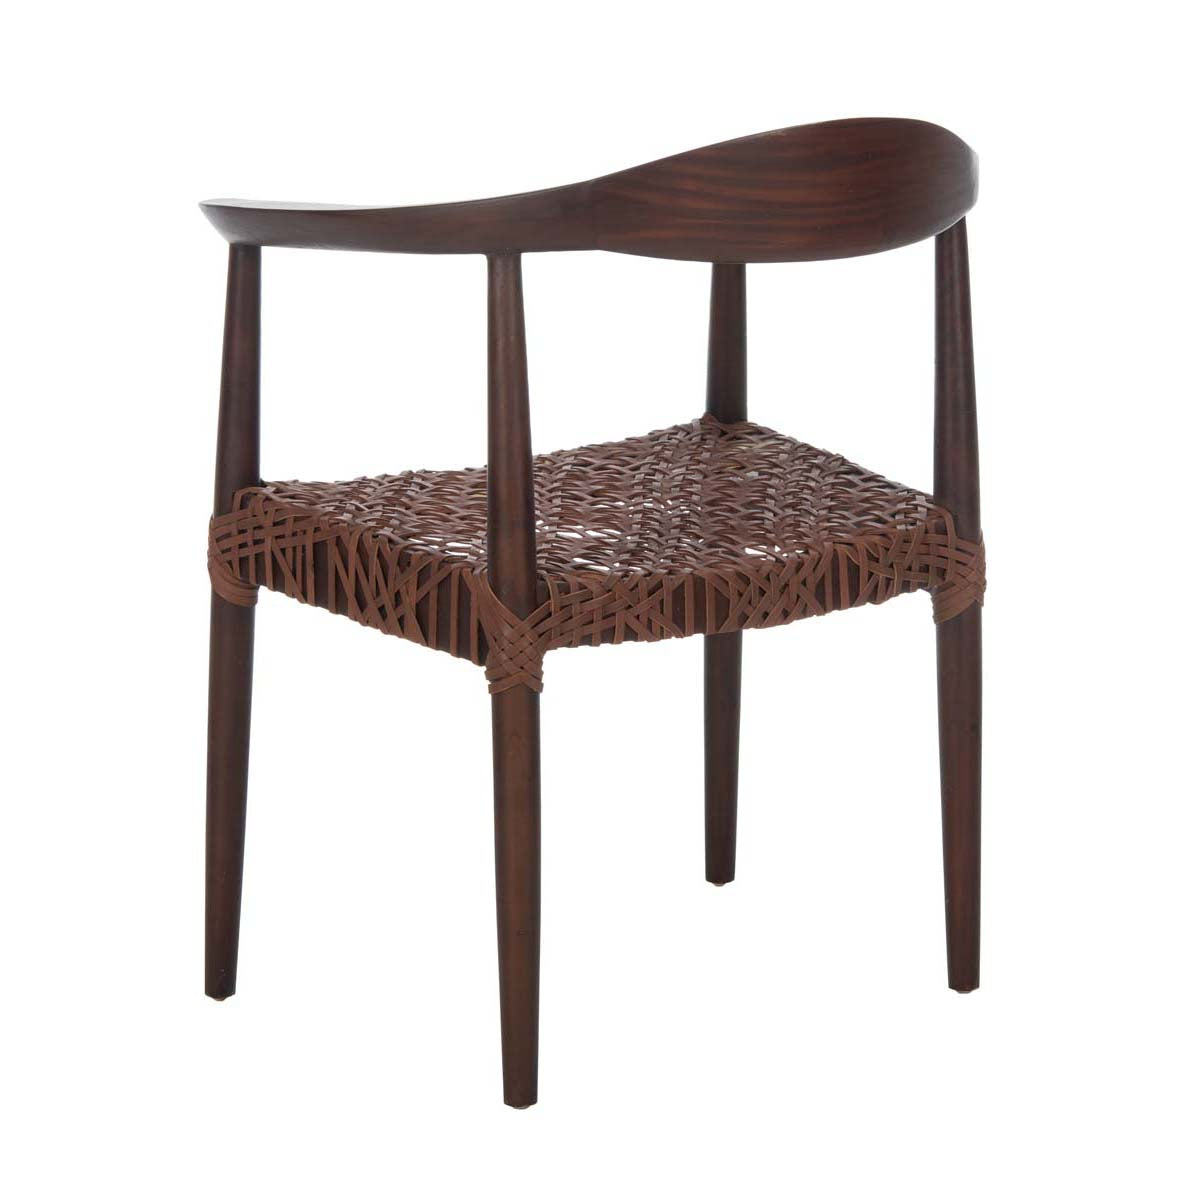 Safavieh Juneau Leather Woven Accent Chair , ACH1003 - Walnut Mindi Wood/Brown Leather